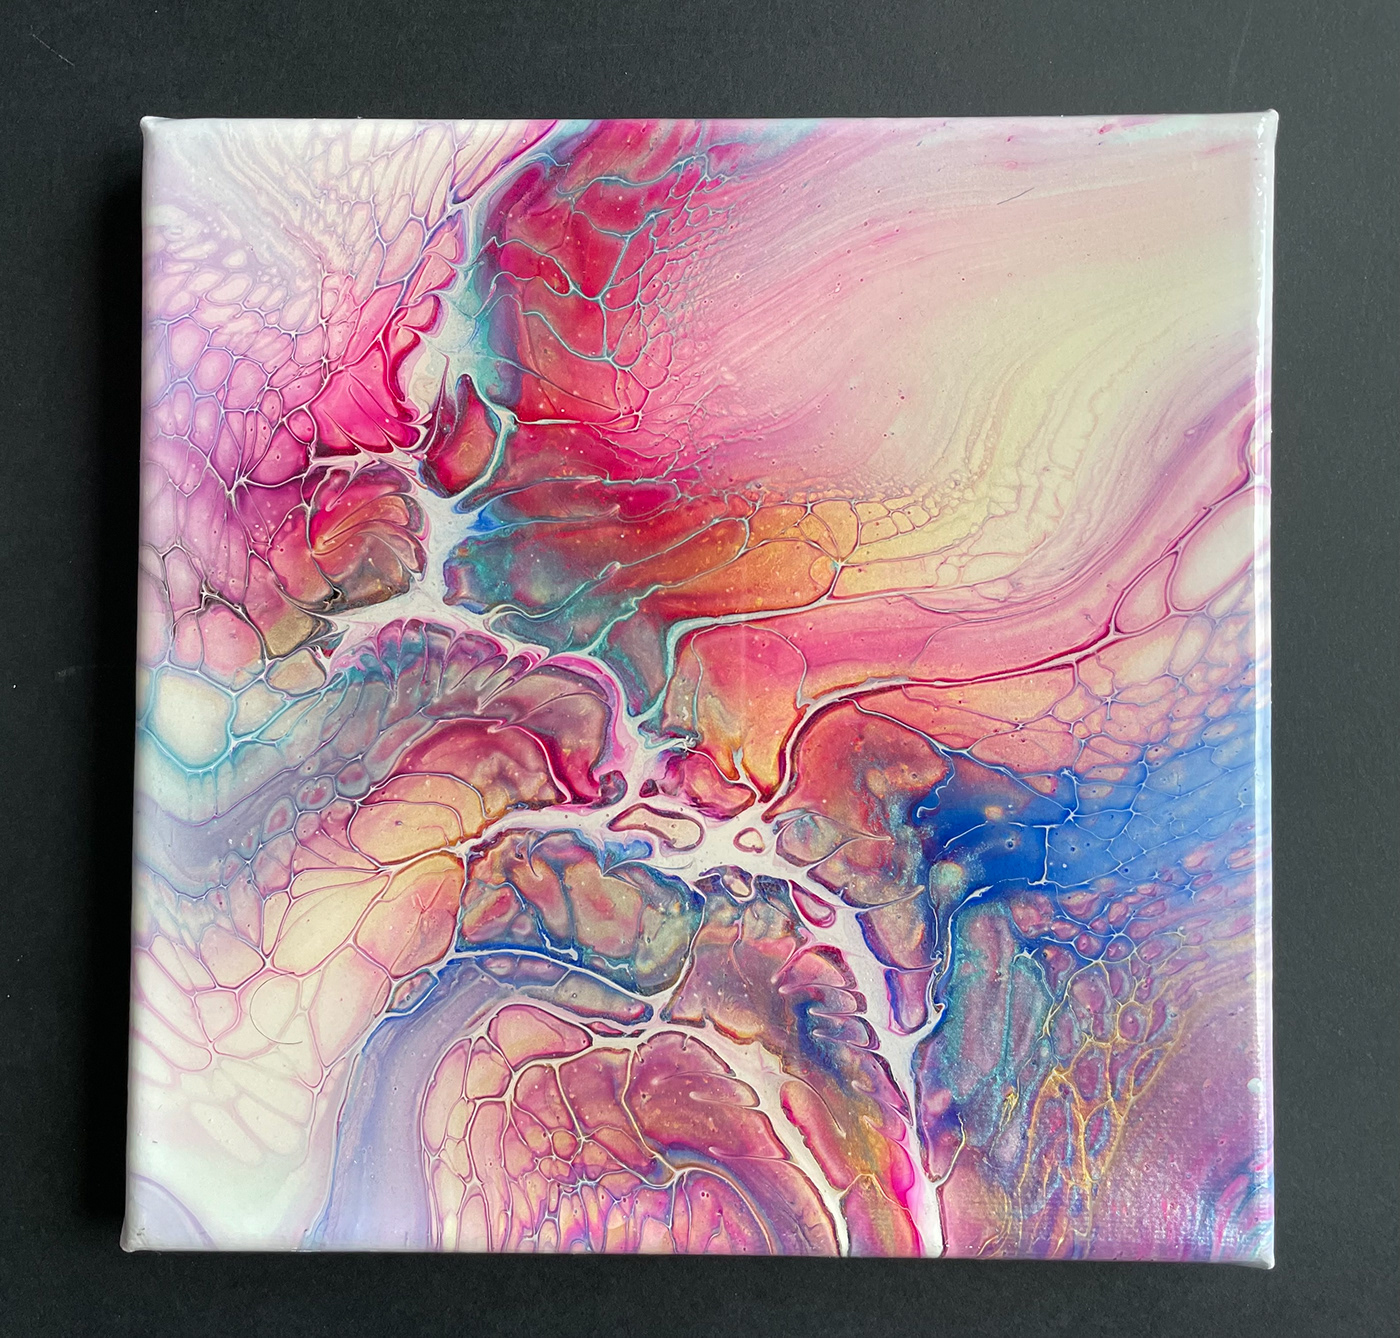 Resin acrylic abstracts